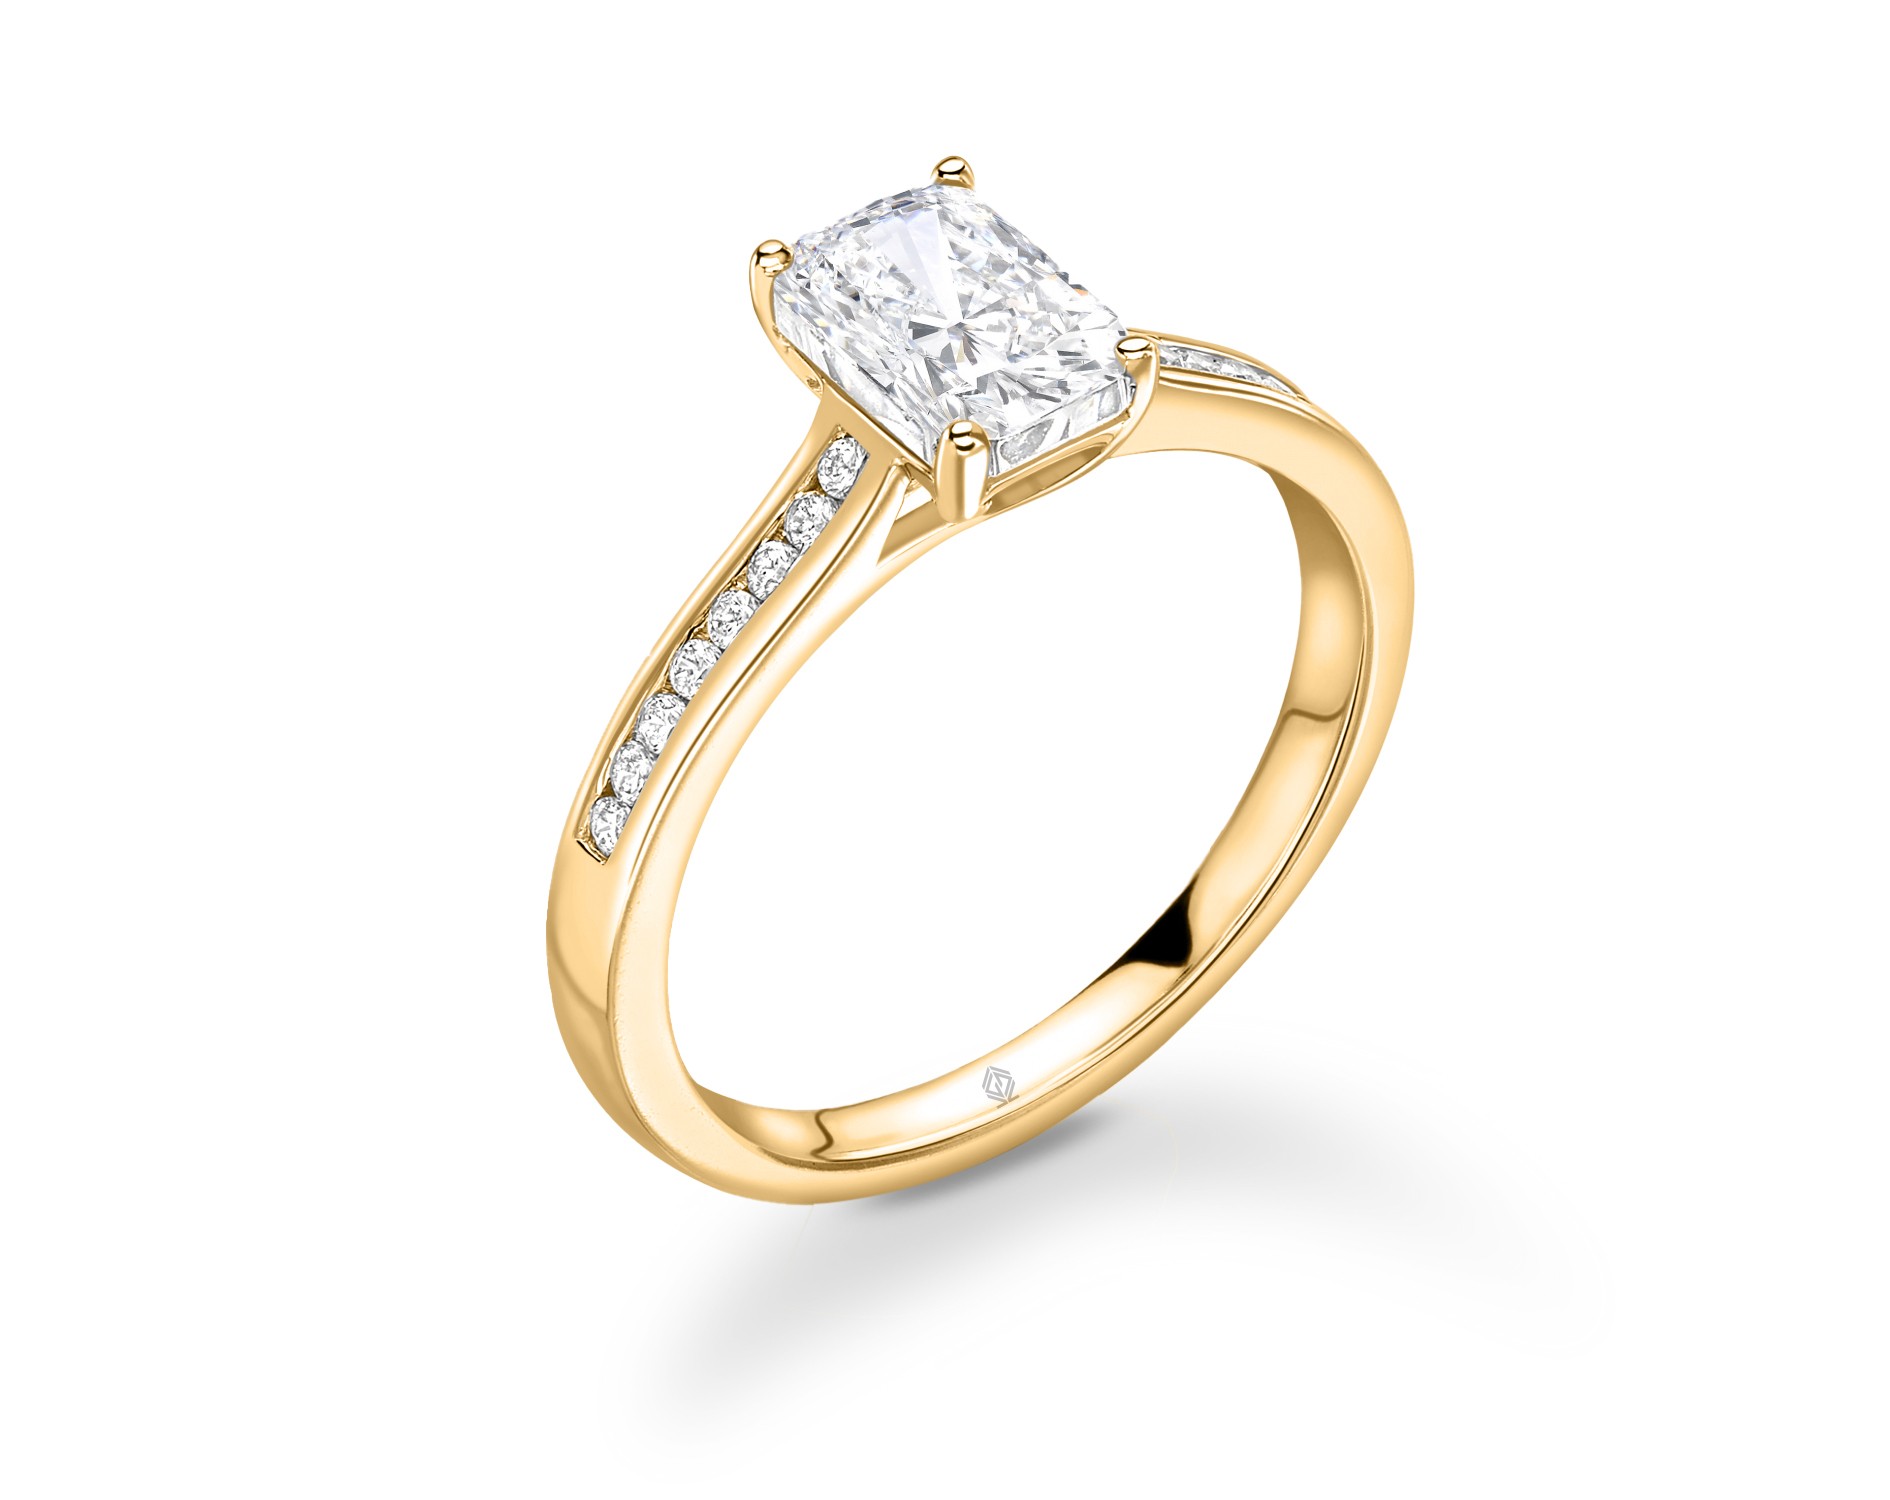 18K YELLOW GOLD 4 PRONGS EMERALD CUT DIAMOND ENGAGEMENT RING WITH SIDE STONES CHANNEL SET